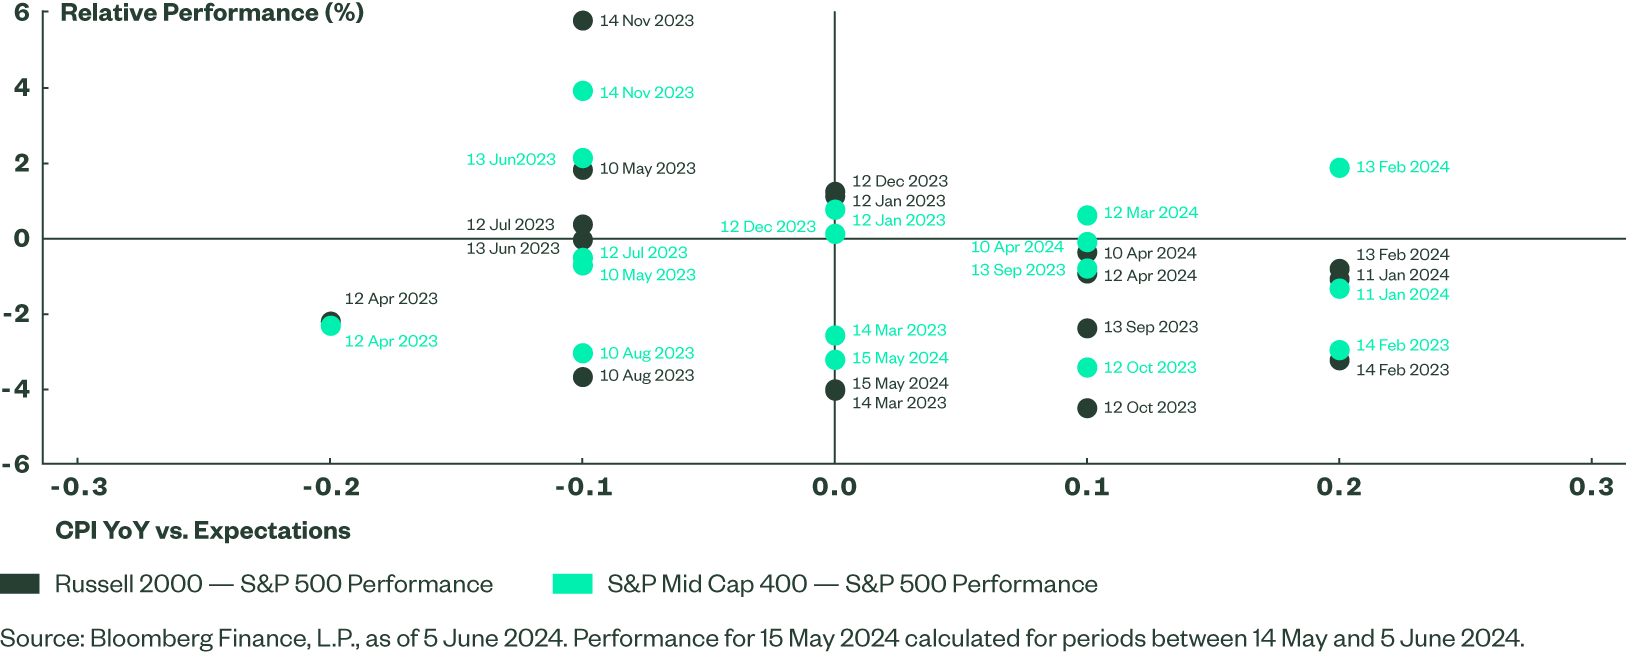 Figure 1 shows the dispersion of relative returns for both small and mid cap indices relative to large caps to see if there is a relationship between performance and inflation.